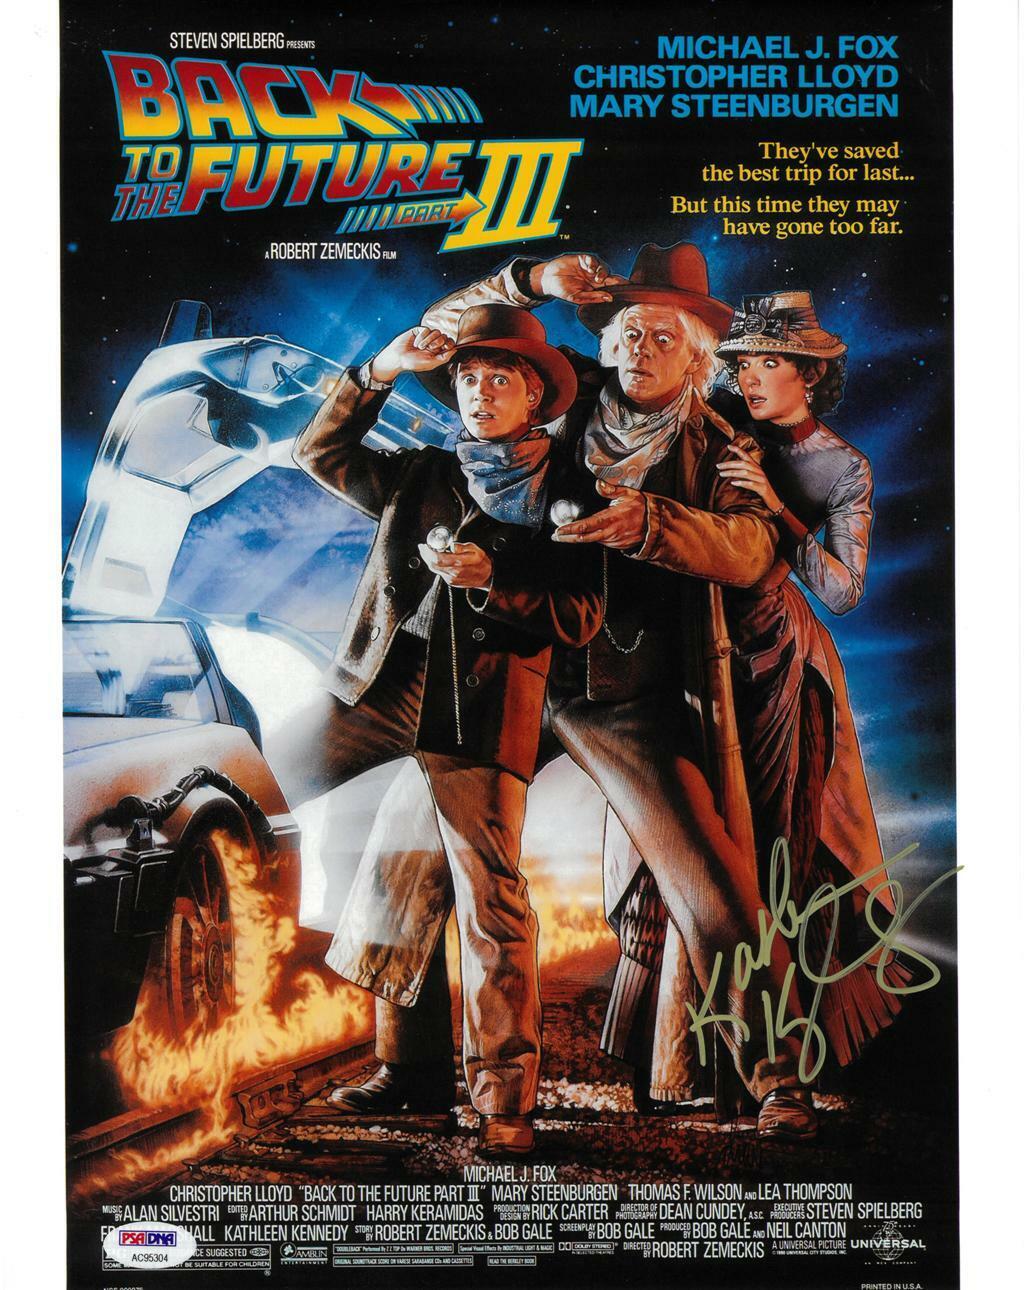 Kathleen Kennedy Signed BTTF III Autographed 11x14 Photo Poster painting PSA/DNA #AC95304